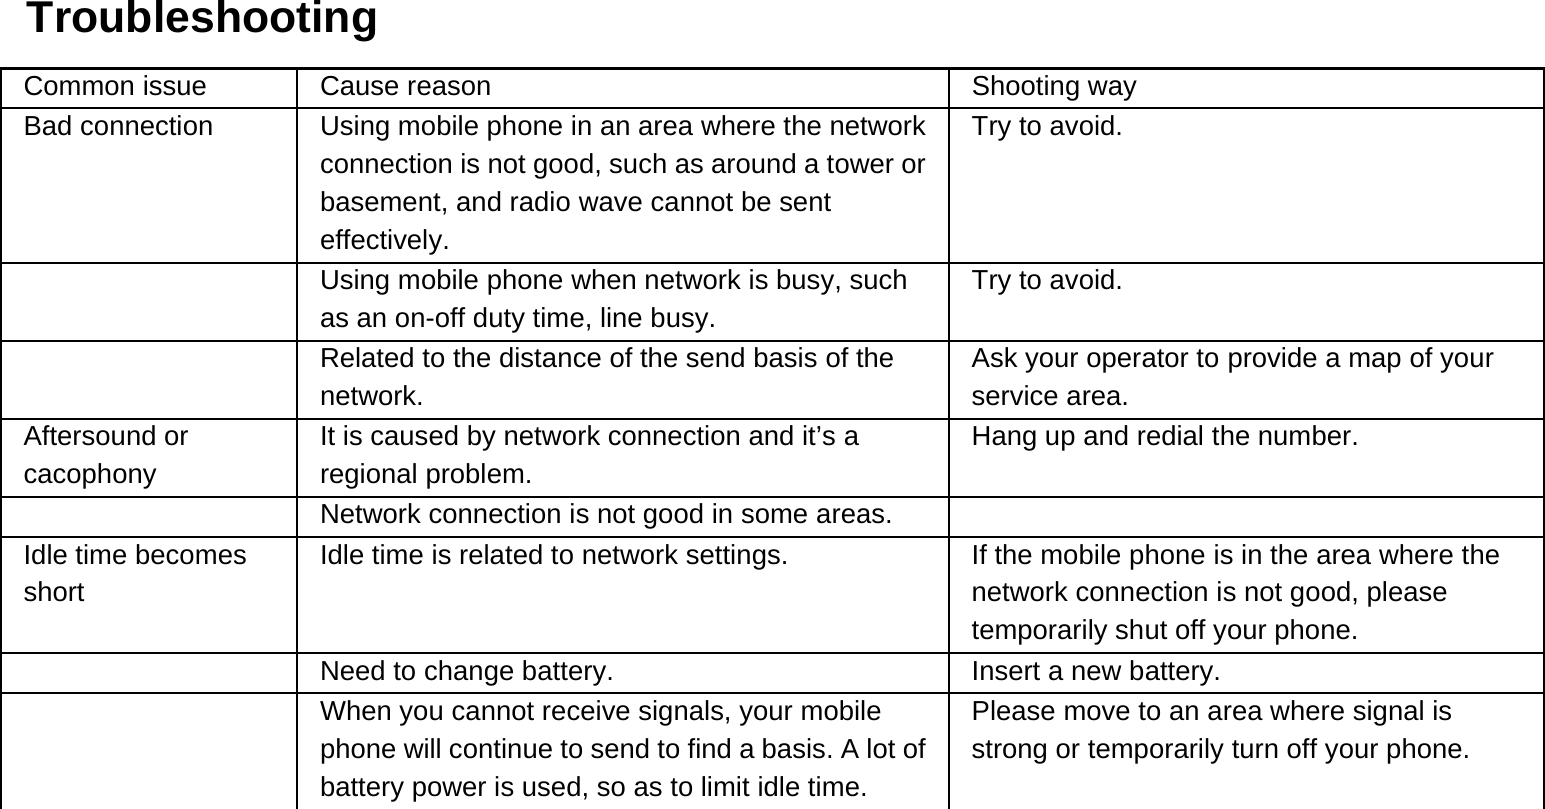  Troubleshooting Common issue  Cause reason  Shooting way Bad connection  Using mobile phone in an area where the network connection is not good, such as around a tower or basement, and radio wave cannot be sent effectively.  Try to avoid.   Using mobile phone when network is busy, such as an on-off duty time, line busy. Try to avoid.   Related to the distance of the send basis of the network. Ask your operator to provide a map of your service area. Aftersound or cacophony It is caused by network connection and it’s a regional problem. Hang up and redial the number.   Network connection is not good in some areas.   Idle time becomes short Idle time is related to network settings.  If the mobile phone is in the area where the network connection is not good, please temporarily shut off your phone.   Need to change battery.  Insert a new battery.   When you cannot receive signals, your mobile phone will continue to send to find a basis. A lot of battery power is used, so as to limit idle time. Please move to an area where signal is strong or temporarily turn off your phone. 